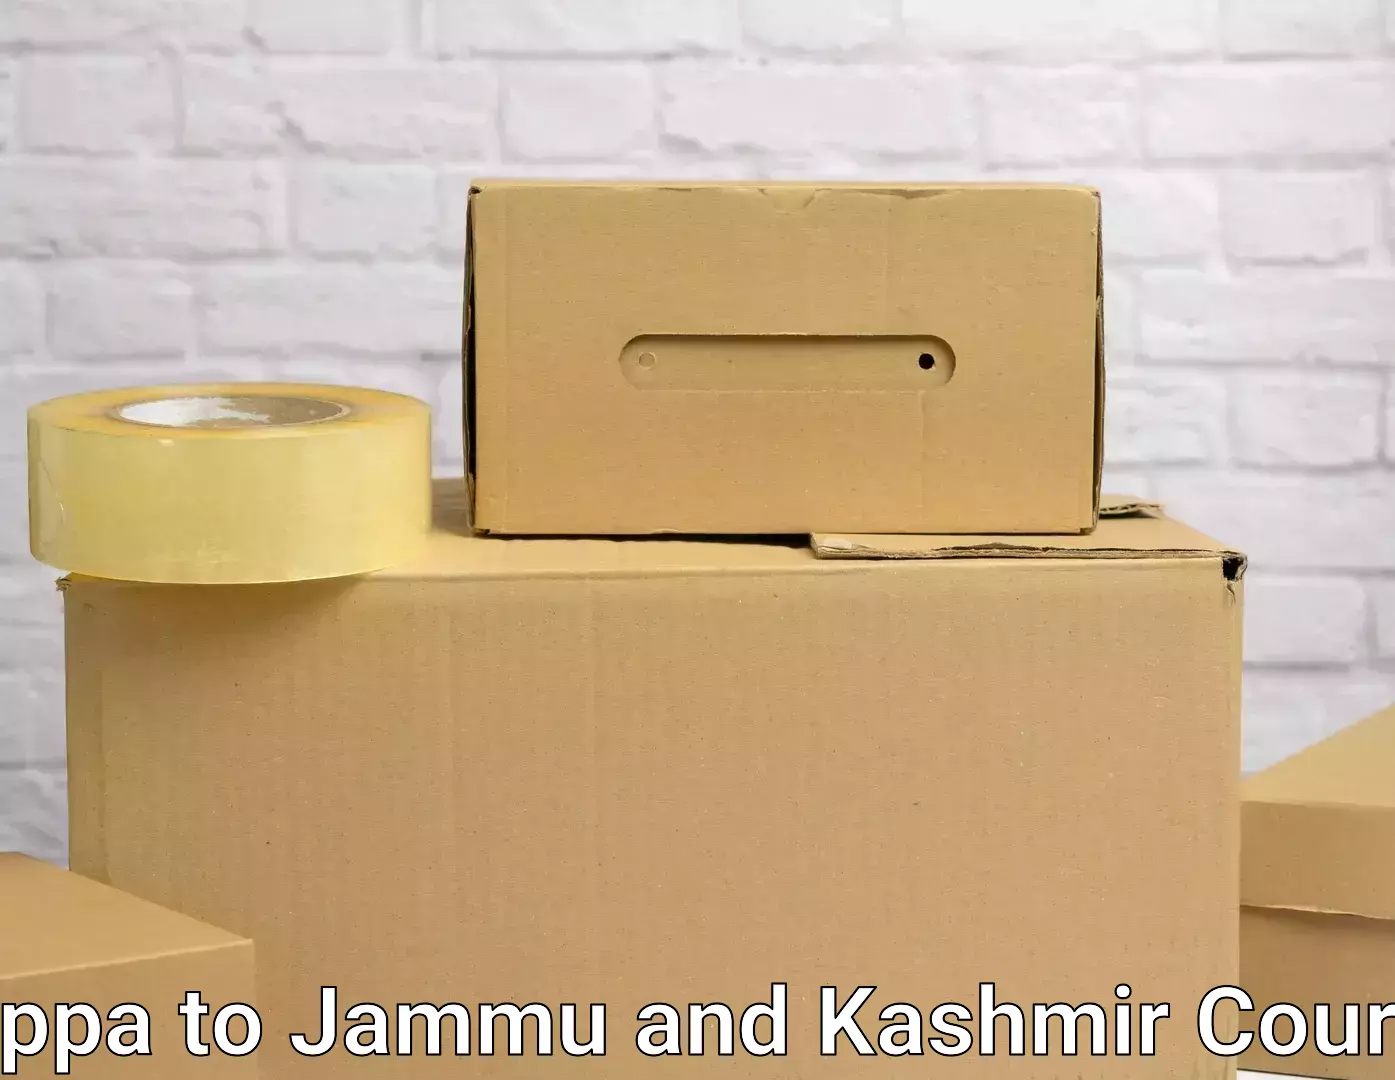 Trusted relocation experts Koppa to Jammu and Kashmir